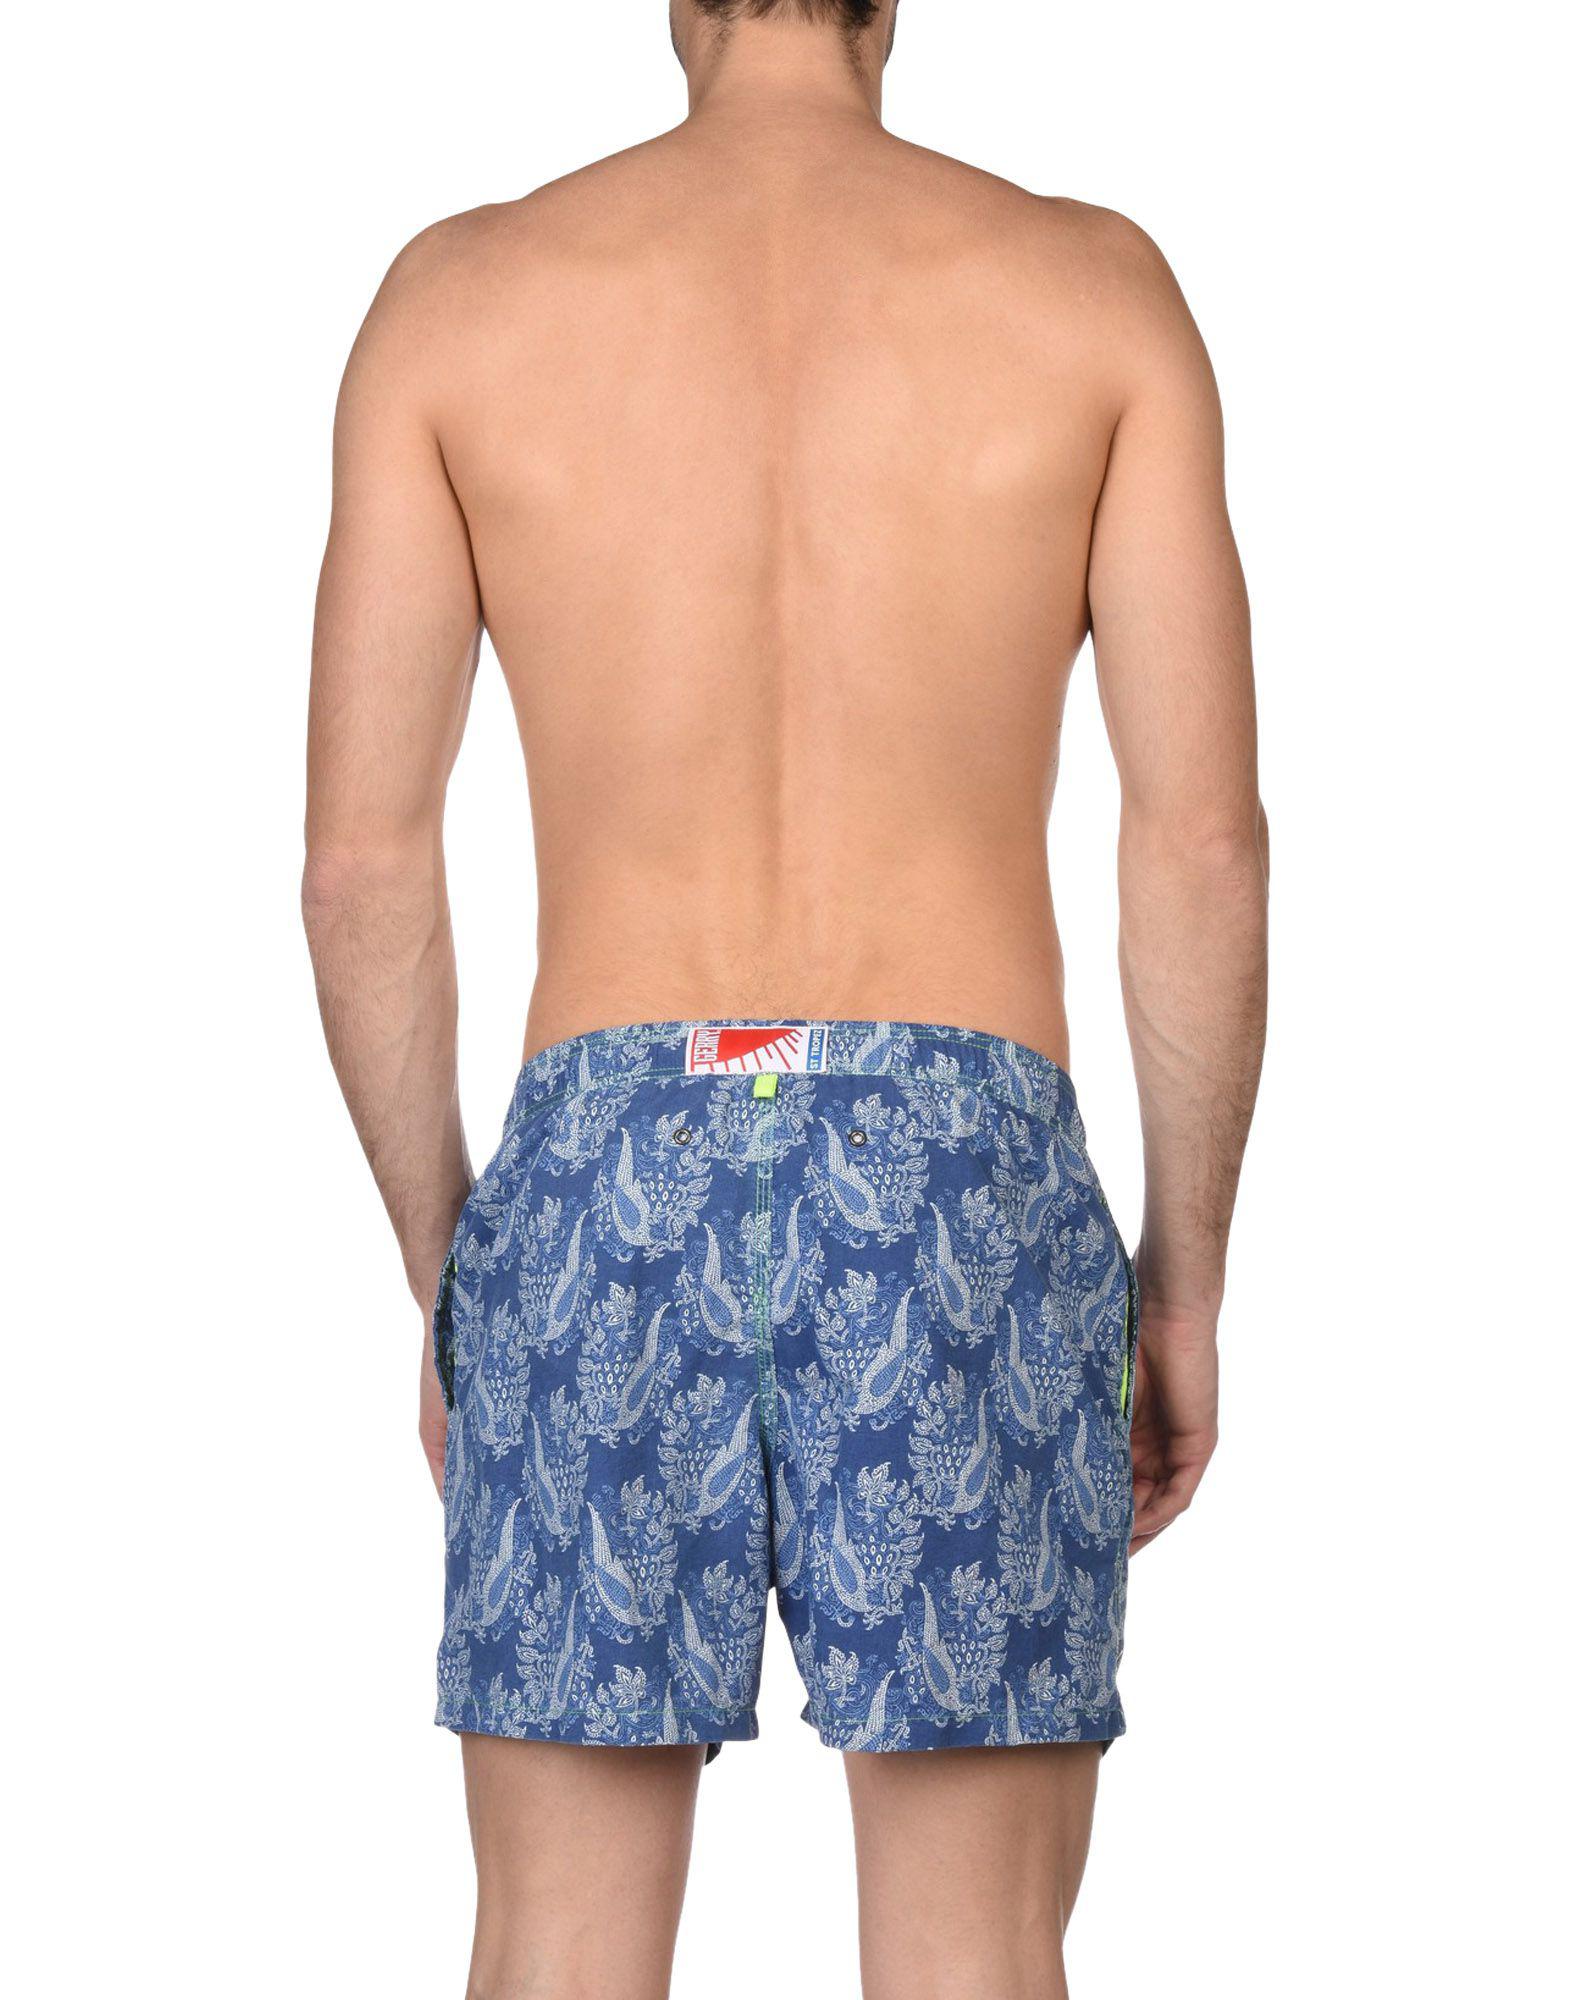 Gerry St. Tropez Synthetic Swimming Trunks in Blue for Men - Lyst